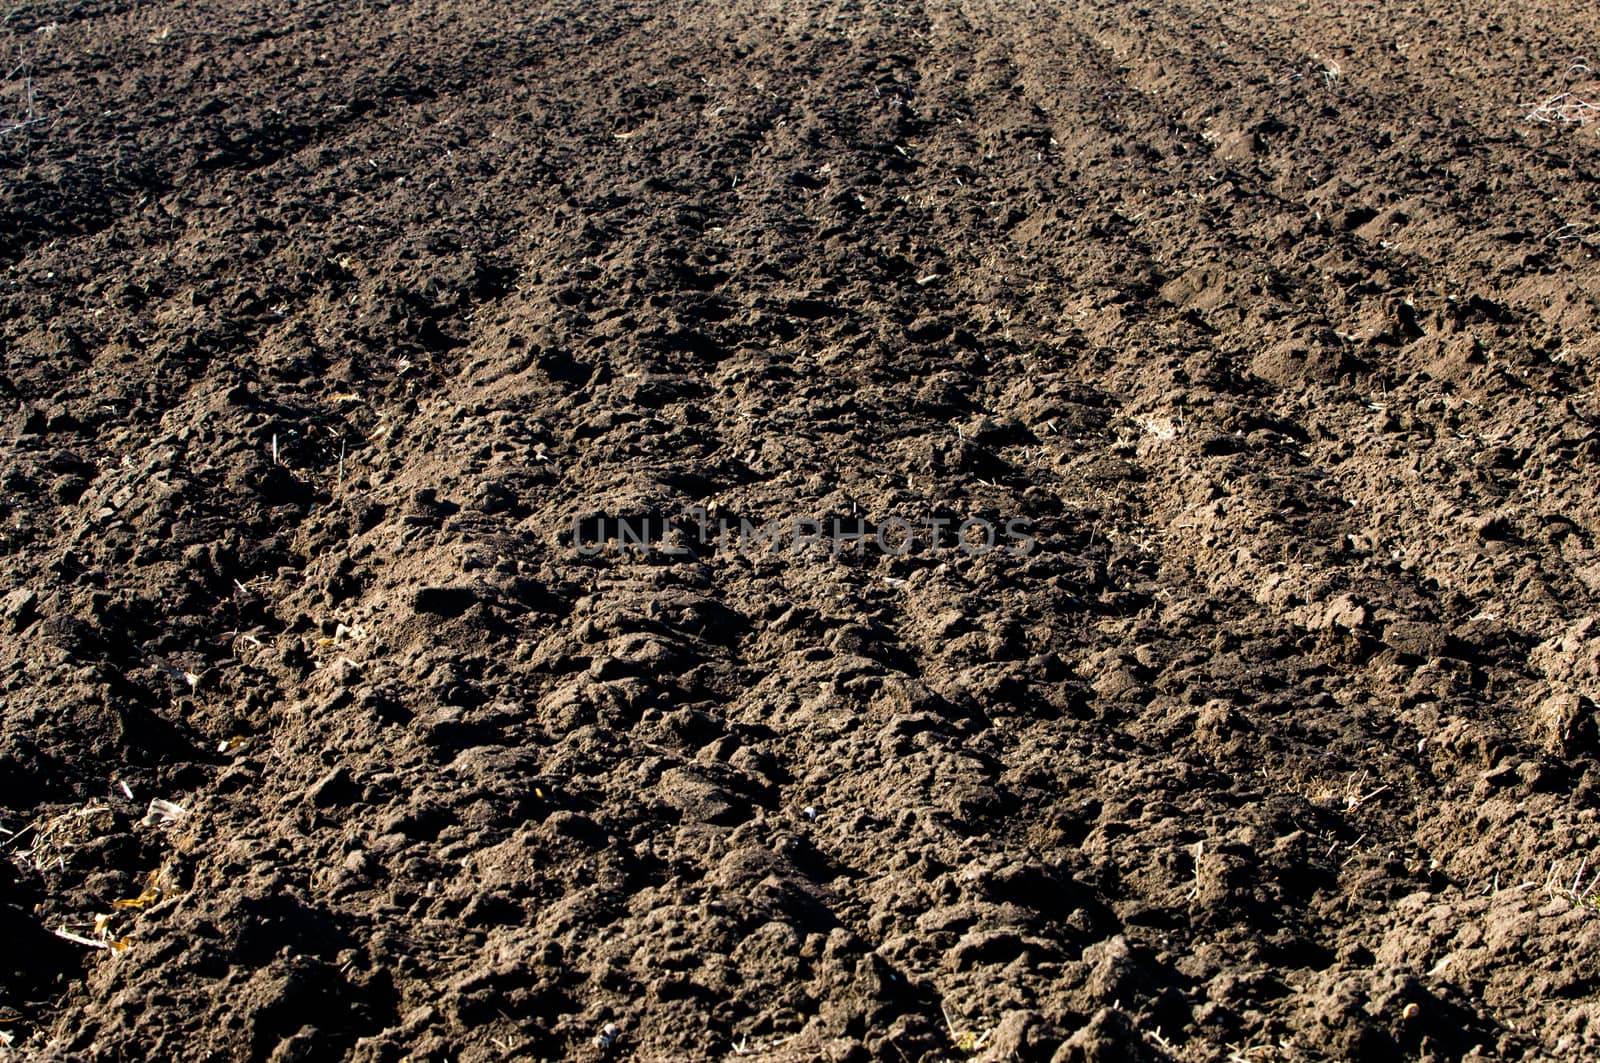 Ploughed soil in agricultural field arable land by horizonphoto